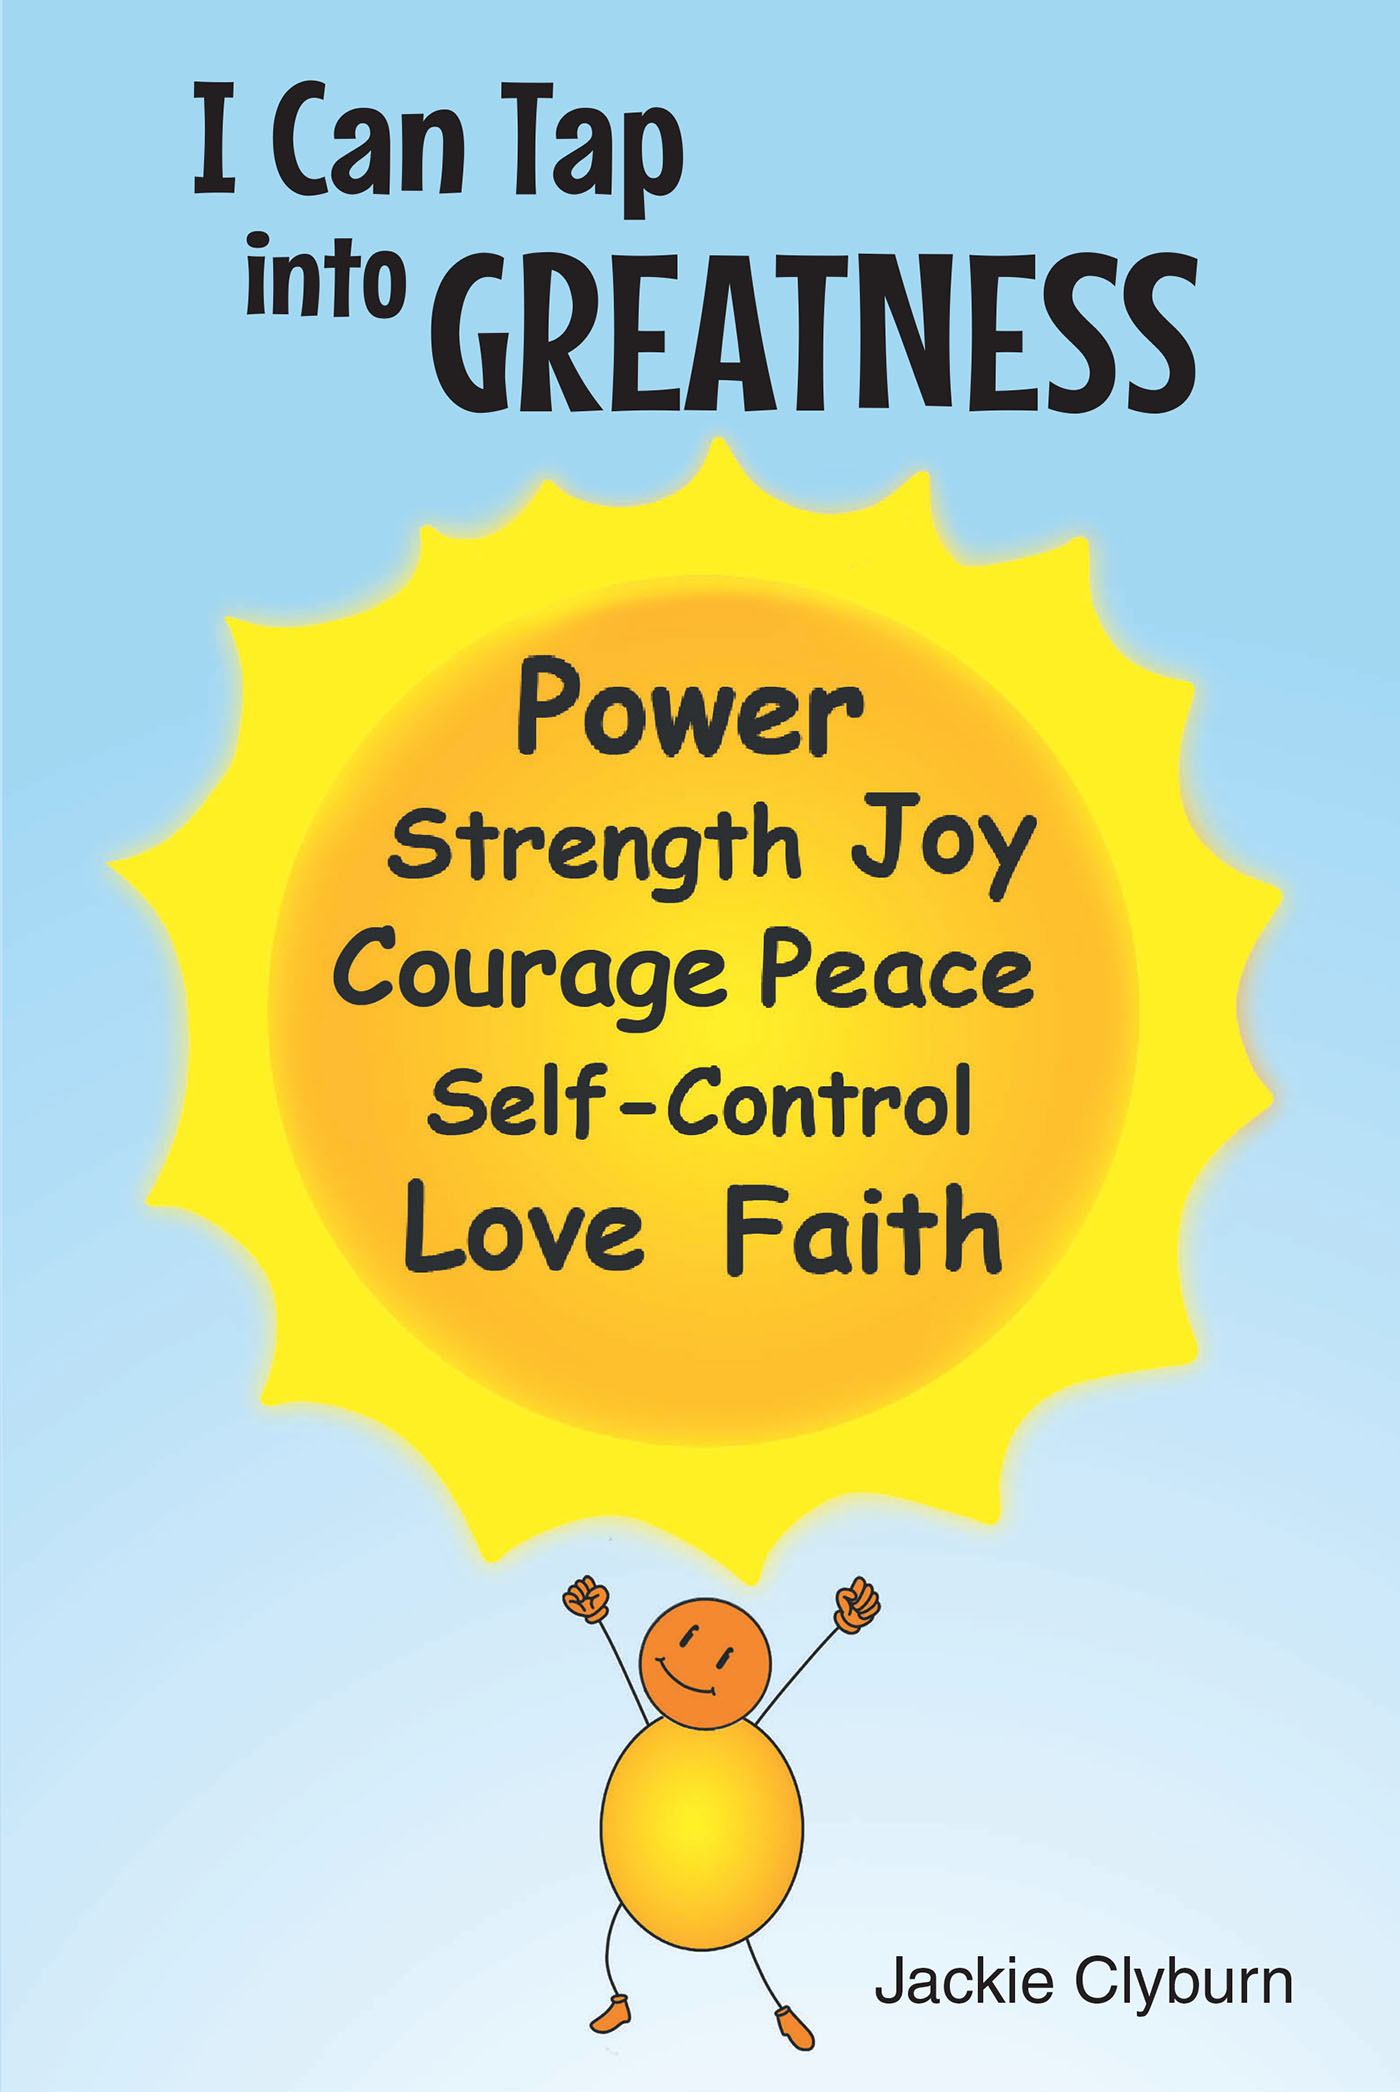 Jackie Clyburn’s Newly Released "I Can Tap Into Greatness" is a Helpful Resource for Learning to Handle Negative Emotions